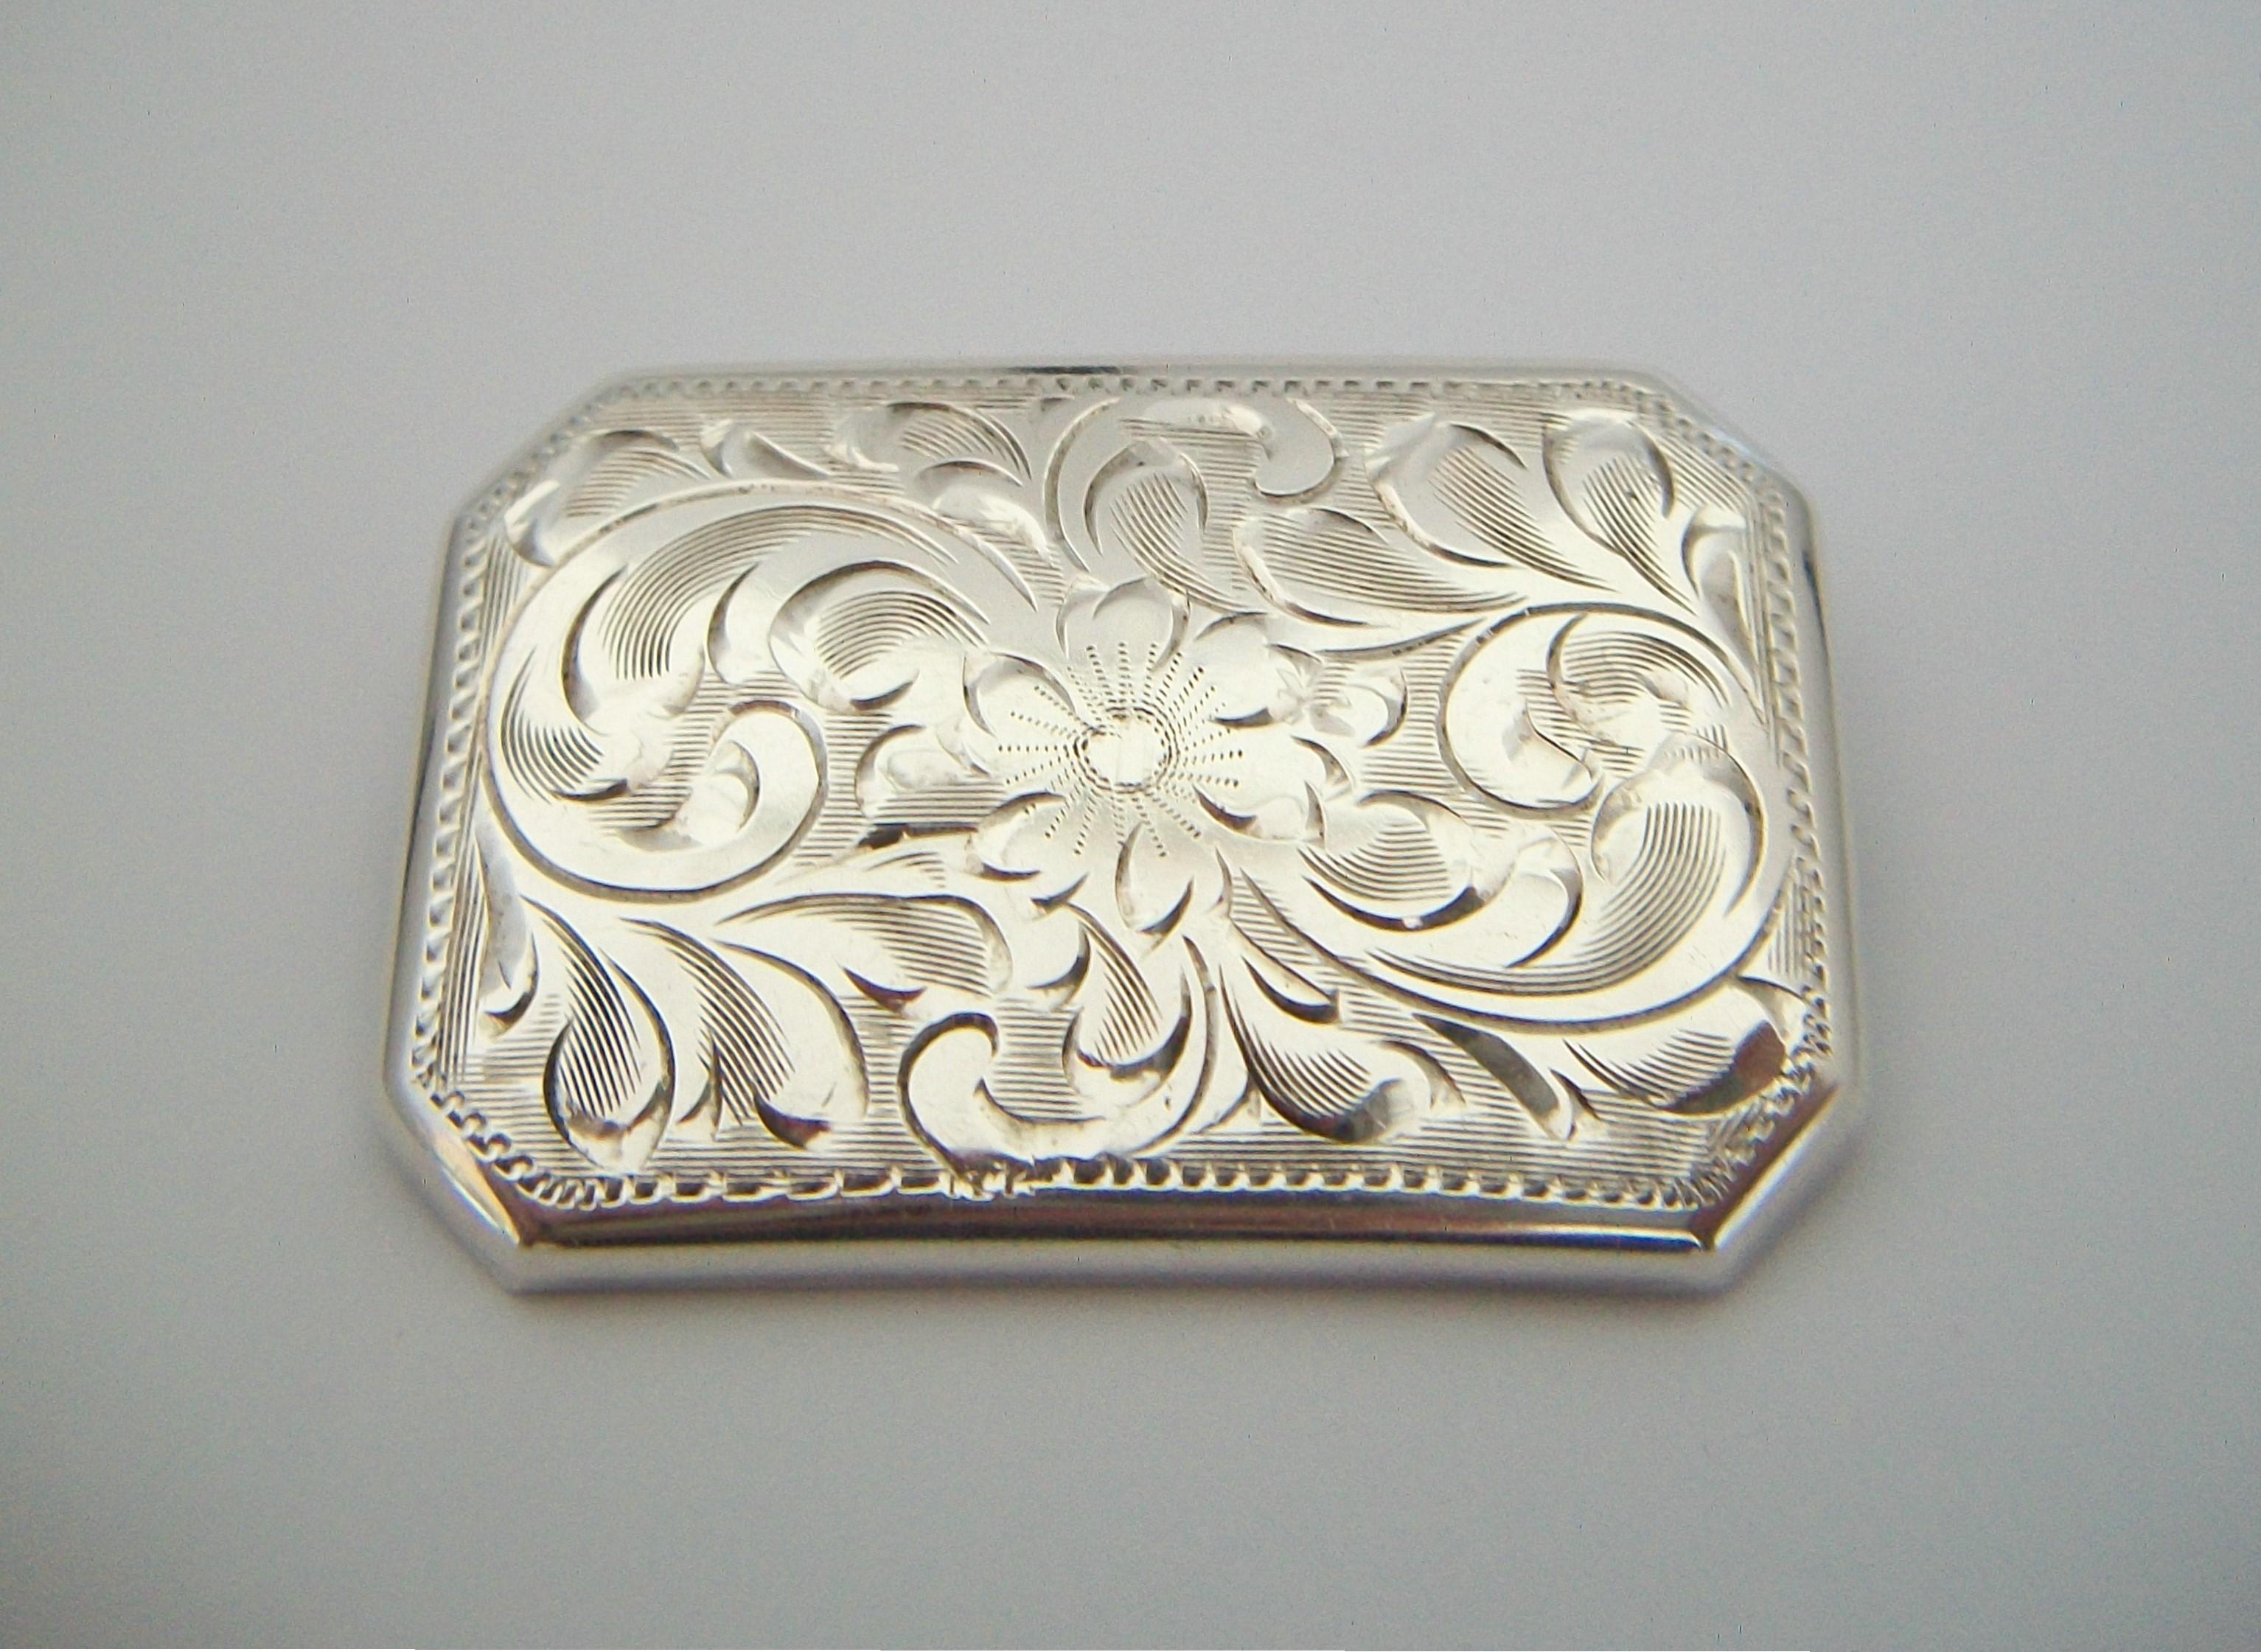 BURKHARDT (Manufacturer) - BIRKS (Retailer) - Vintage engraved sterling silver brooch - fine hand made quality - featuring a floral and scroll pattern - original pin and closure - signed on the back - Canada - circa 1950's.

Excellent / mint vintage